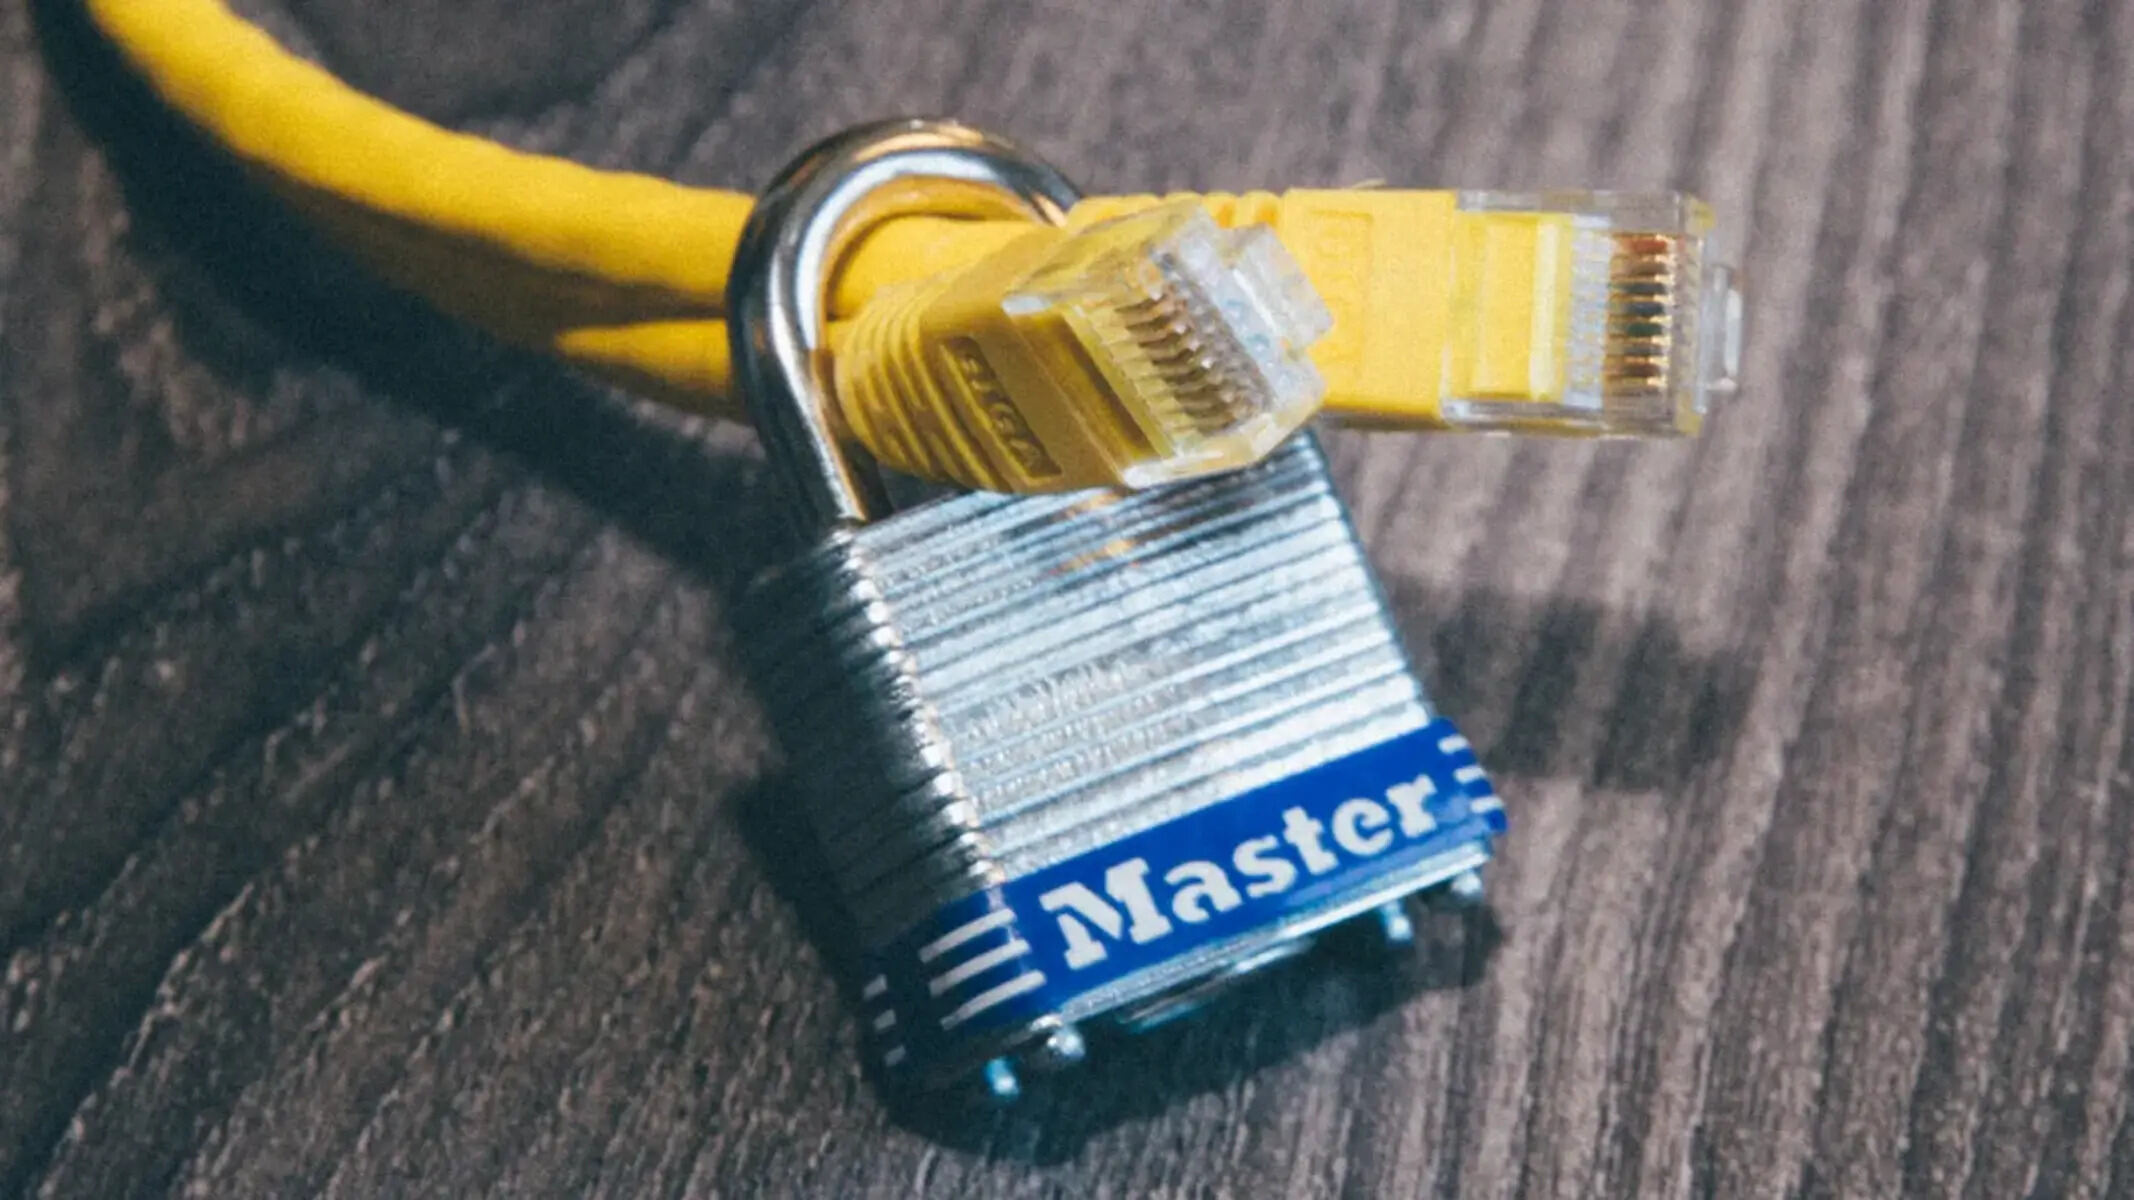 How To Make My Internet Security Stronger